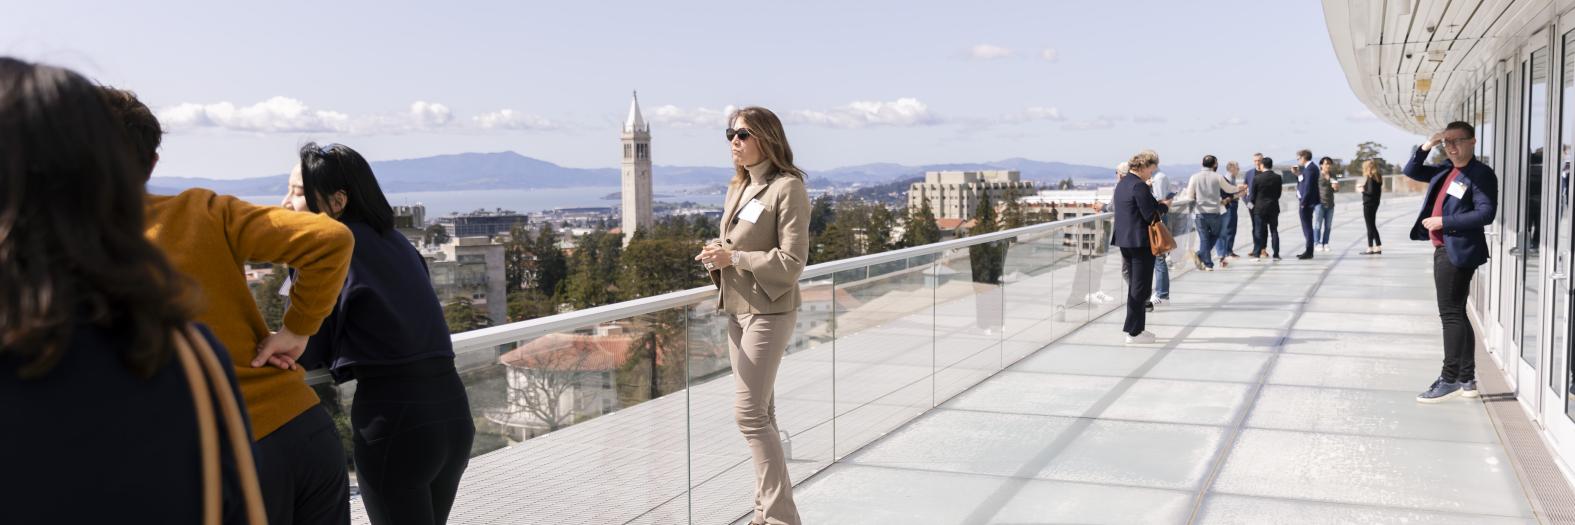 Multiple people standing on outside deck with UC Berkeley campanile and bay in background